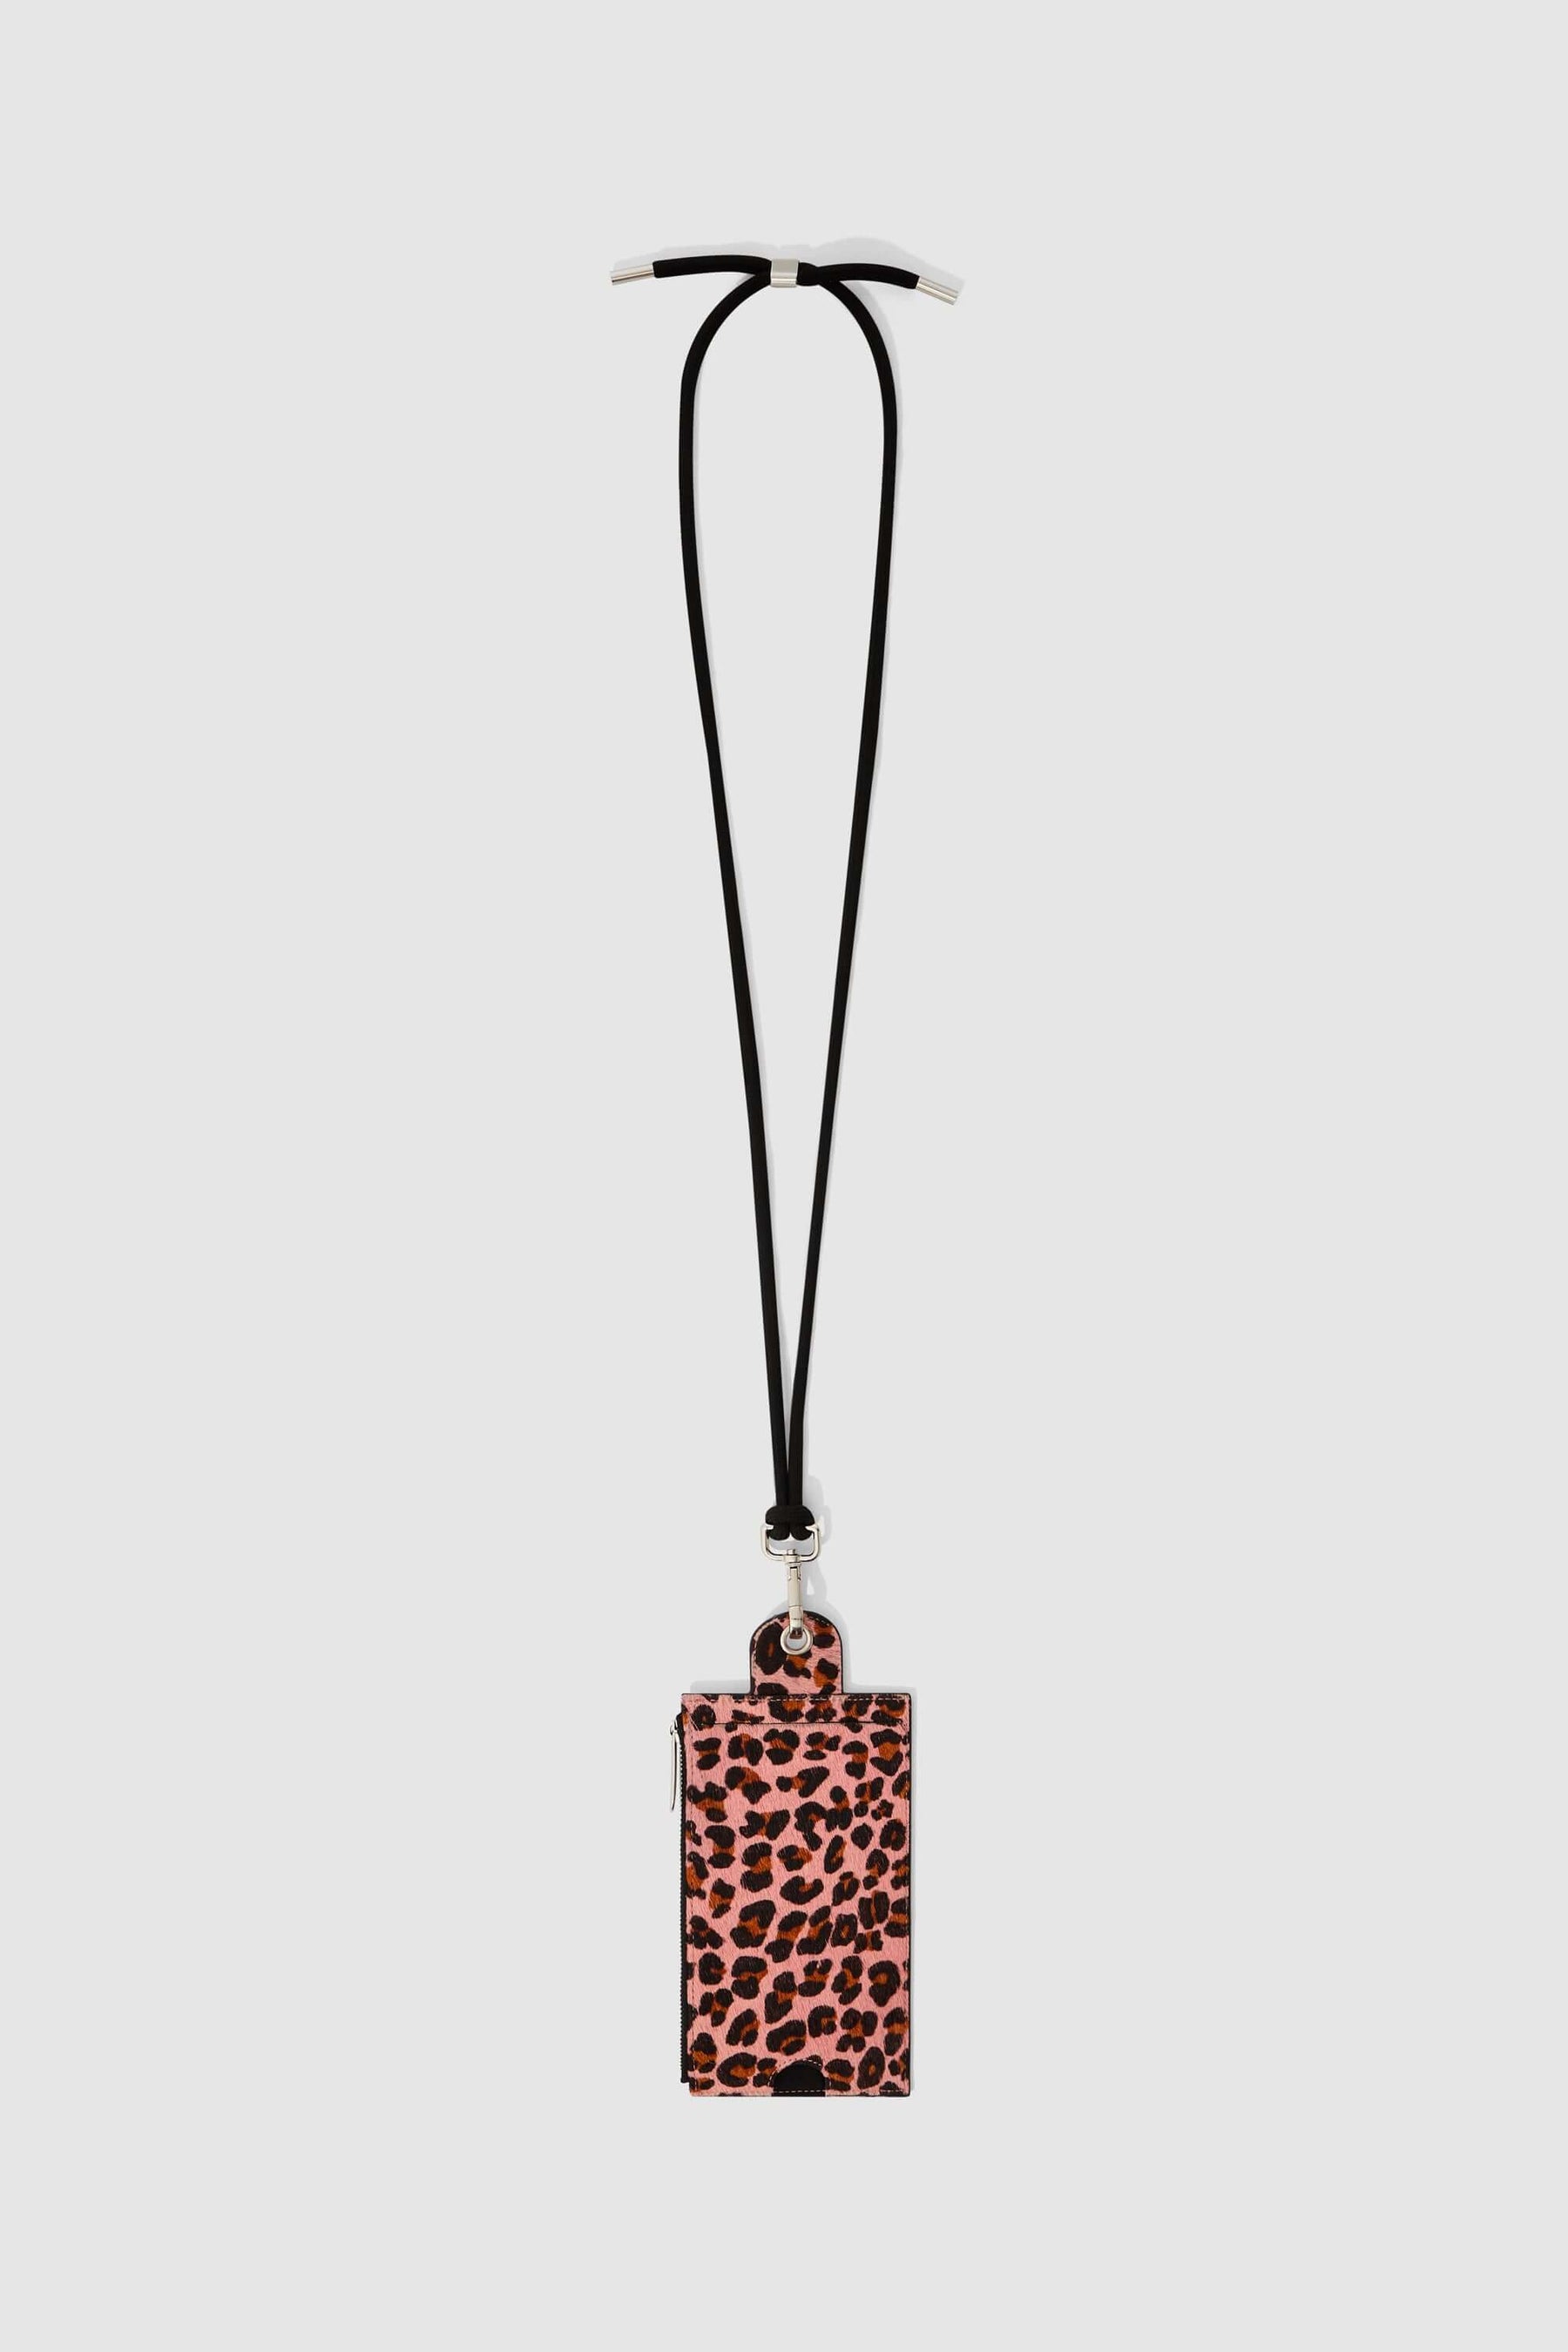 The Minis - Large neck wallet in pink Leopard printed leather